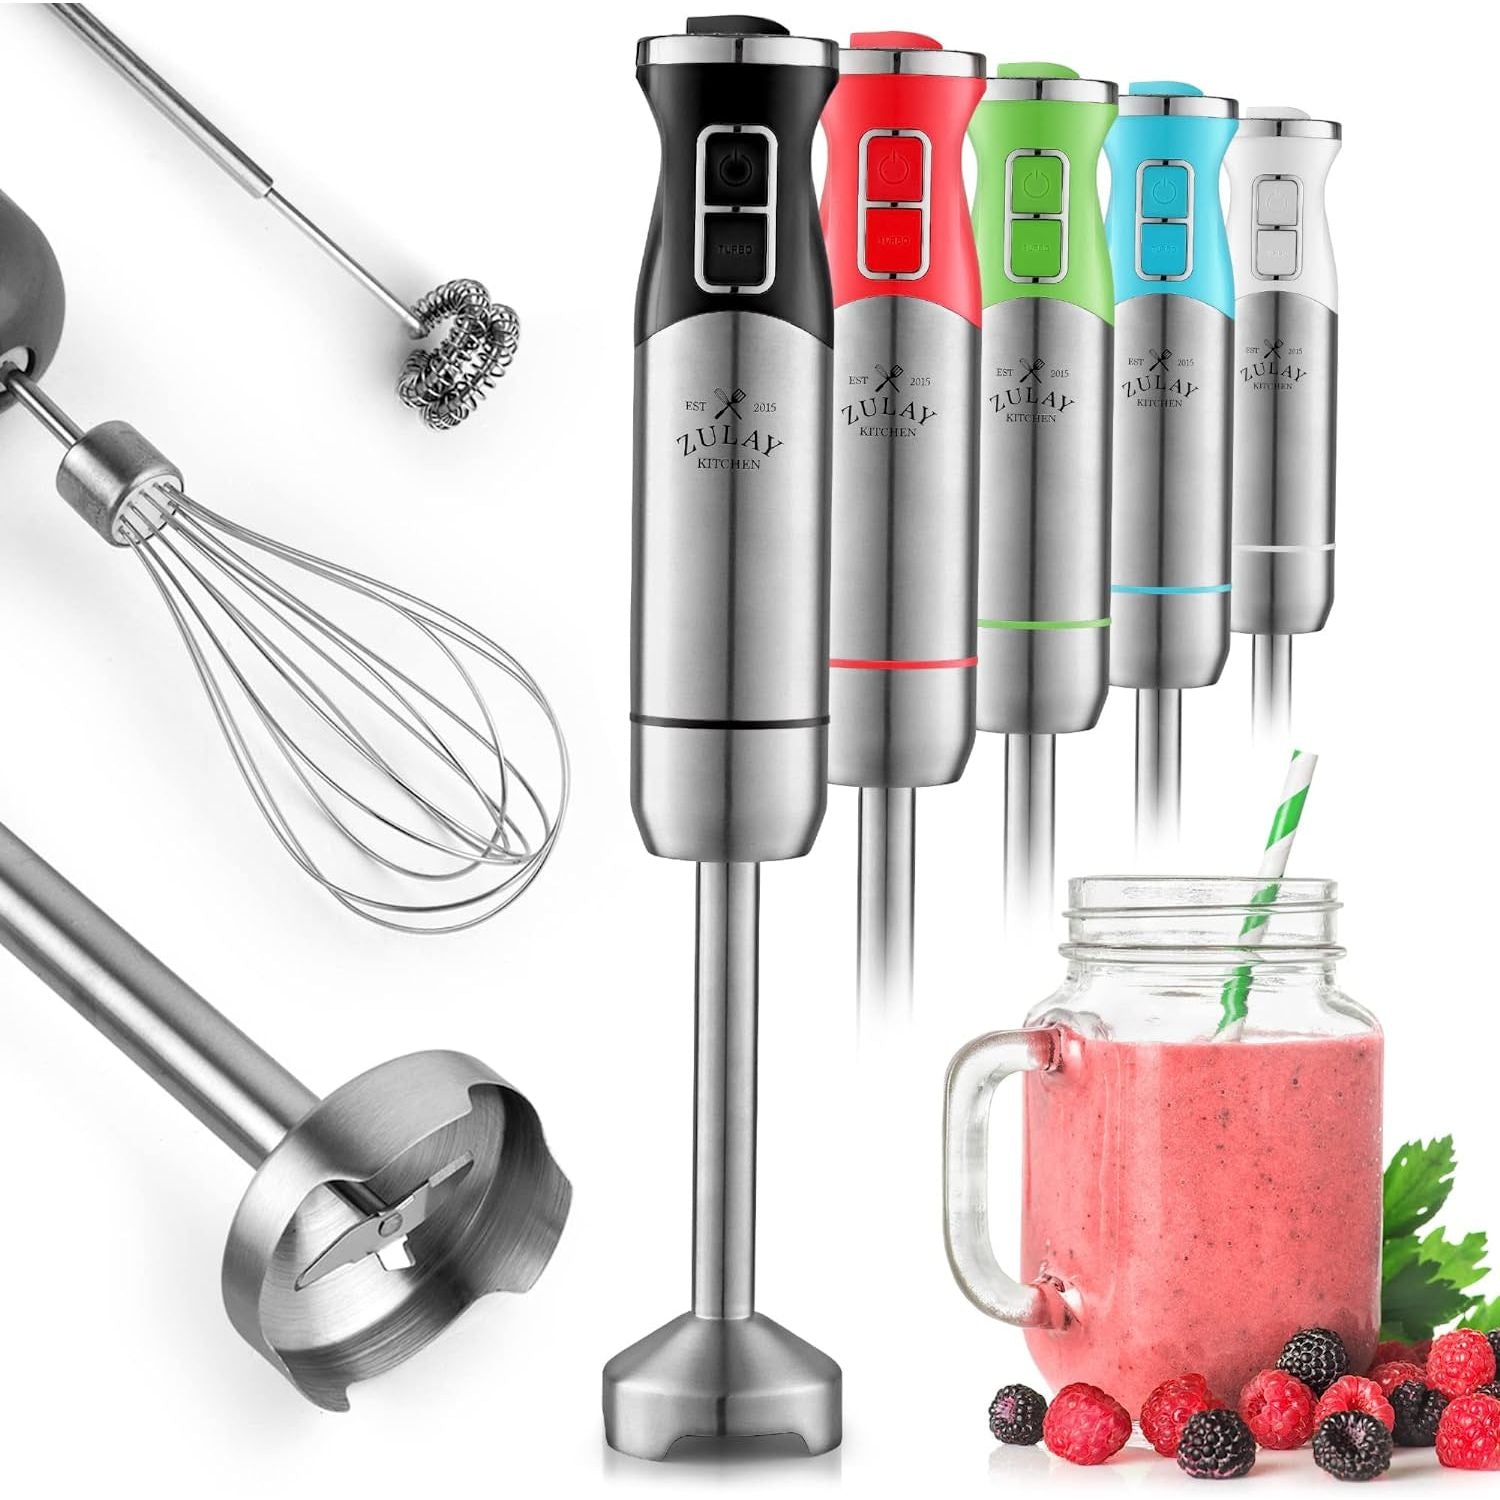 Zulay Kitchen Immersion Blender – Handheld 500w Powerful Blender for Cooking